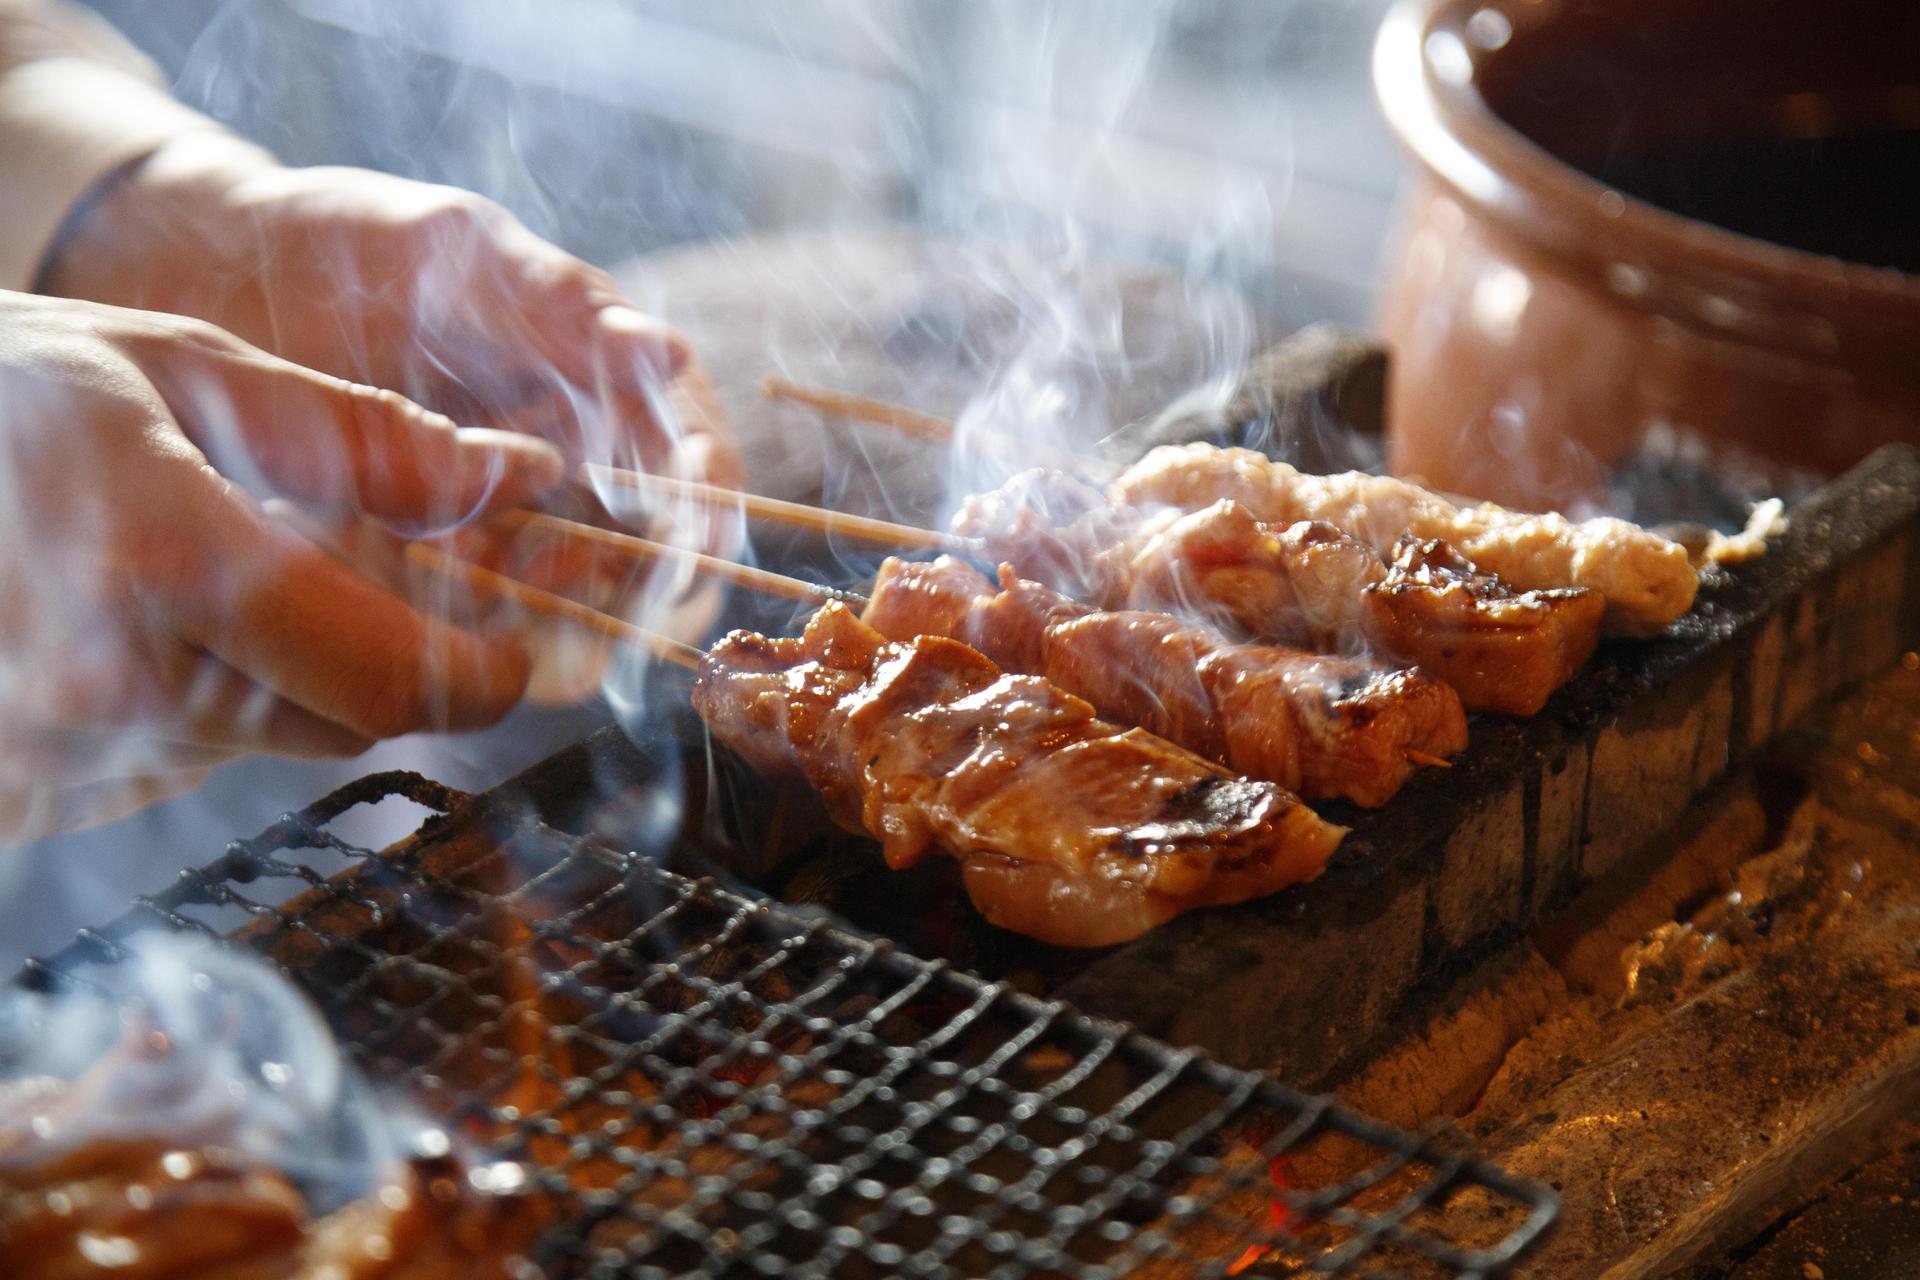 A close-up shot shows skewered hunks of juicy chicken meat steaming and smoking on a grill.